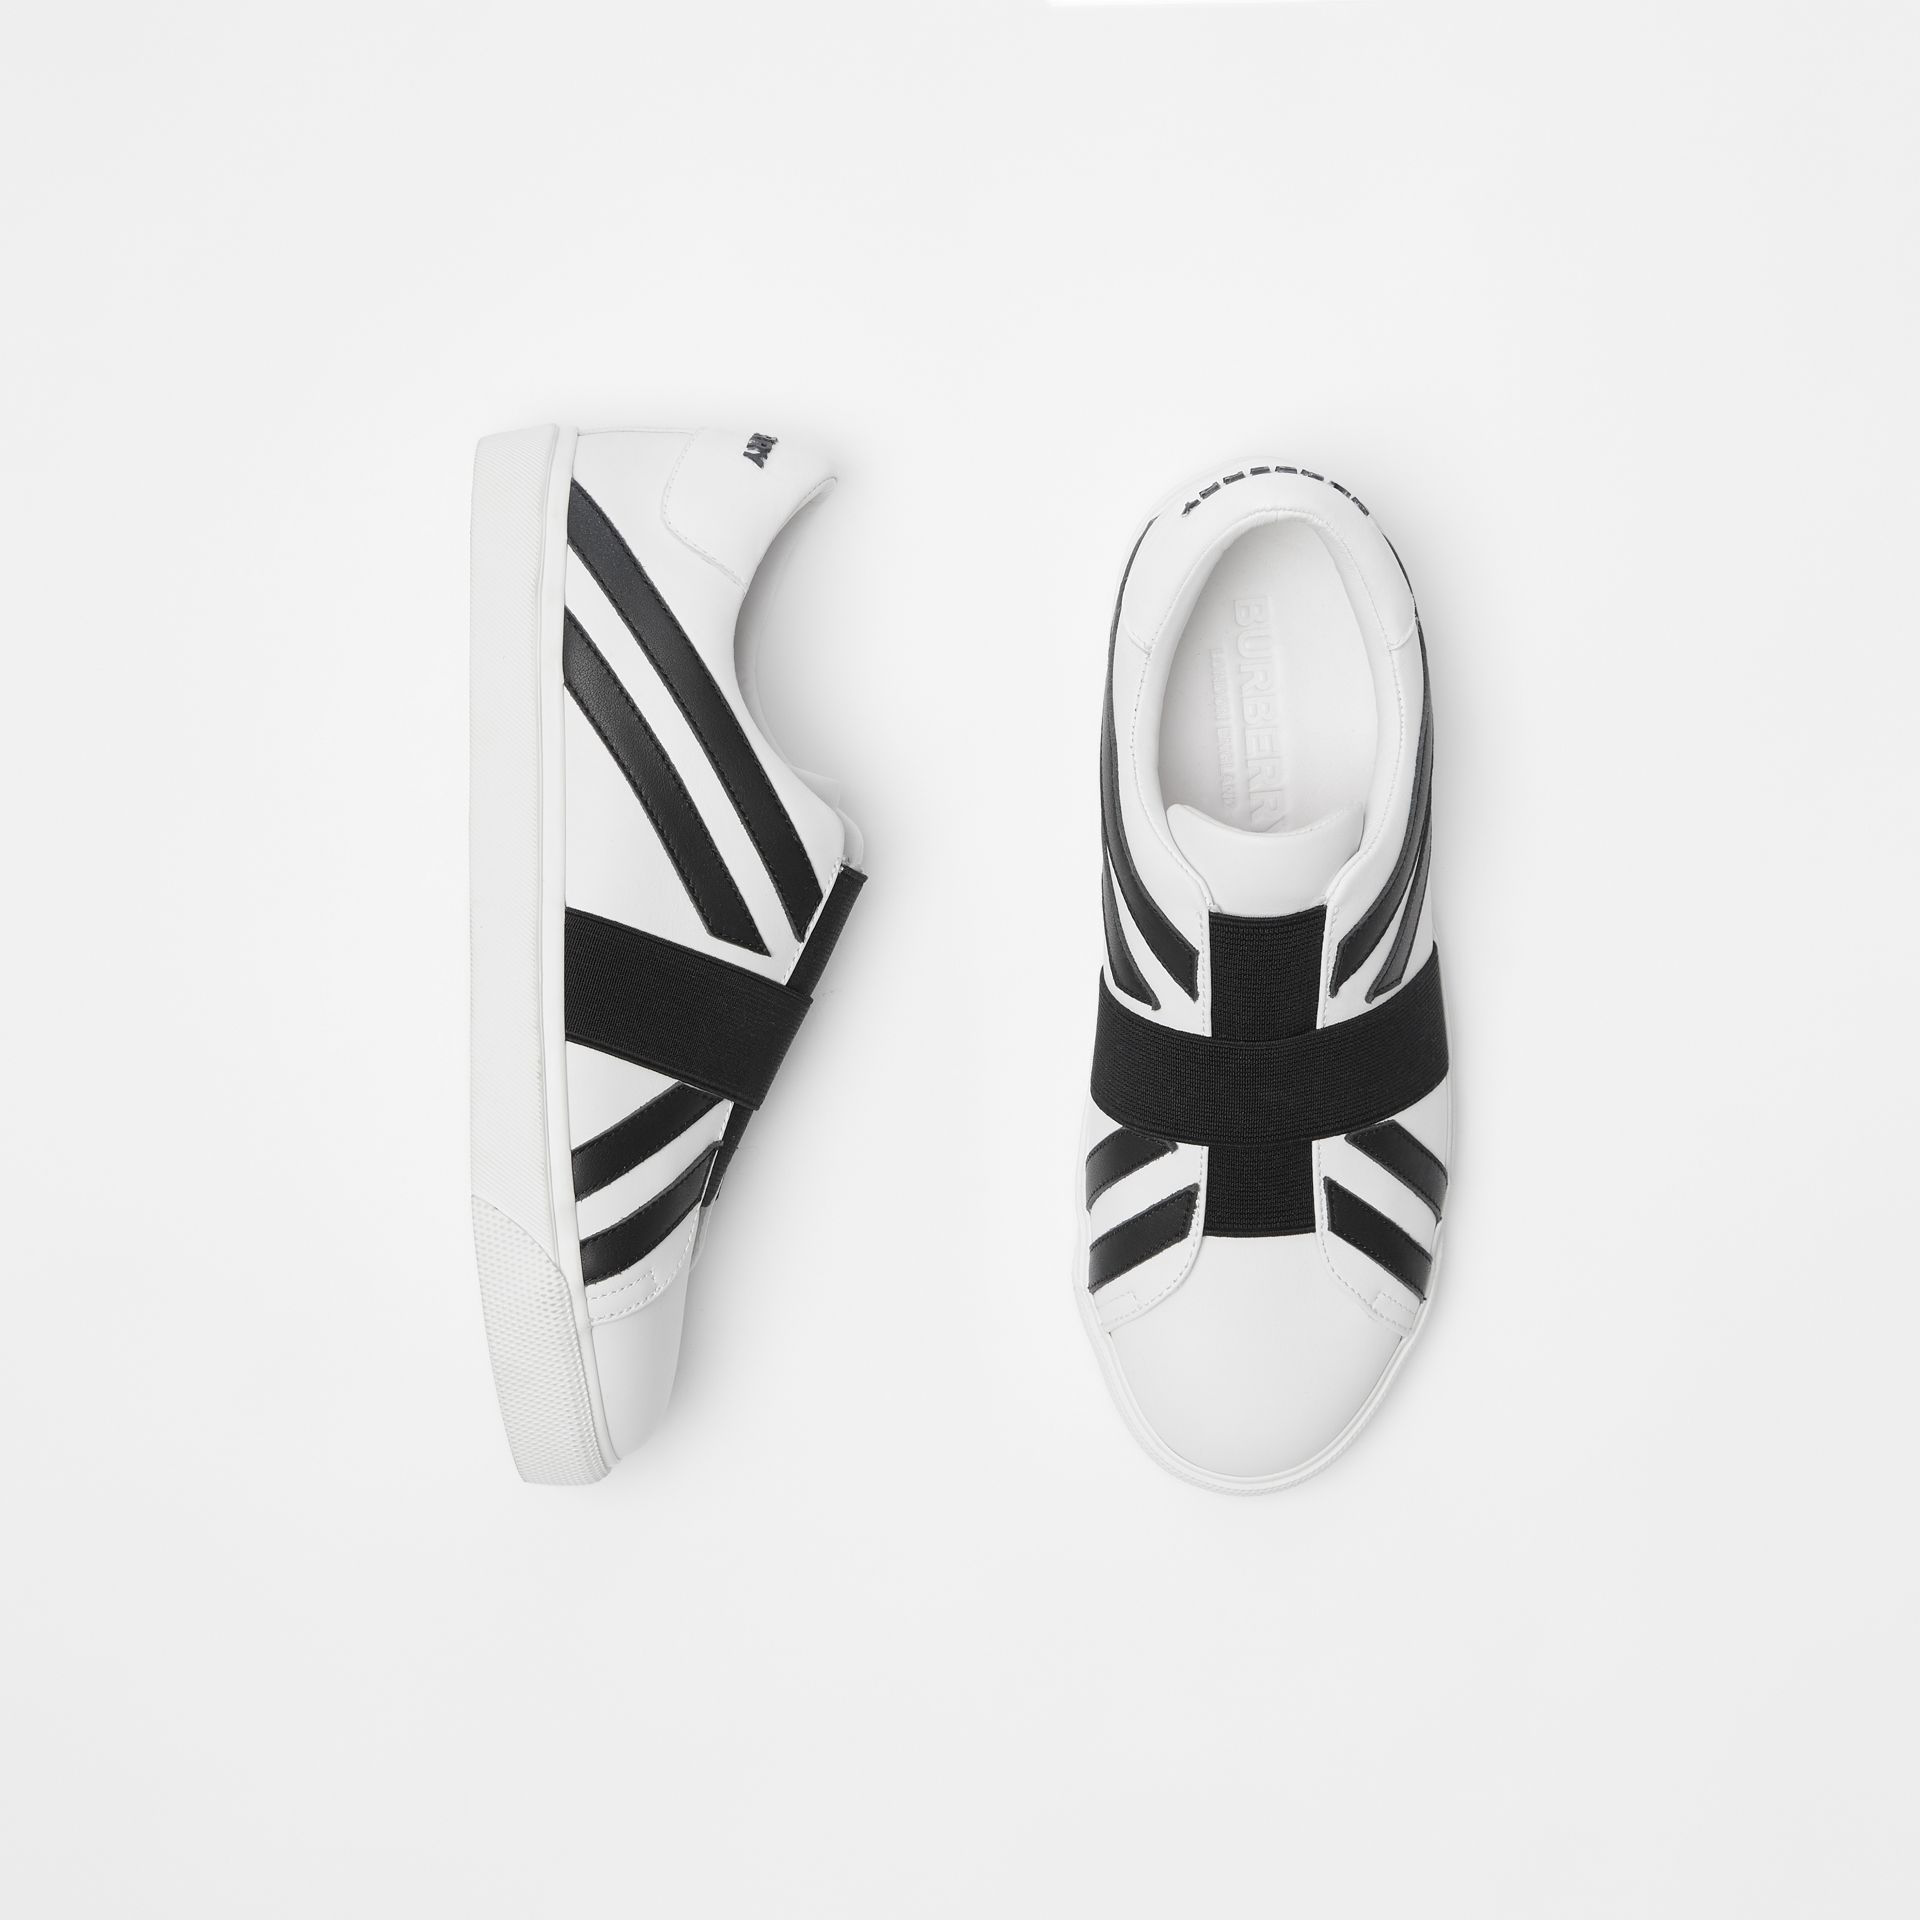 burberry union jack sneakers